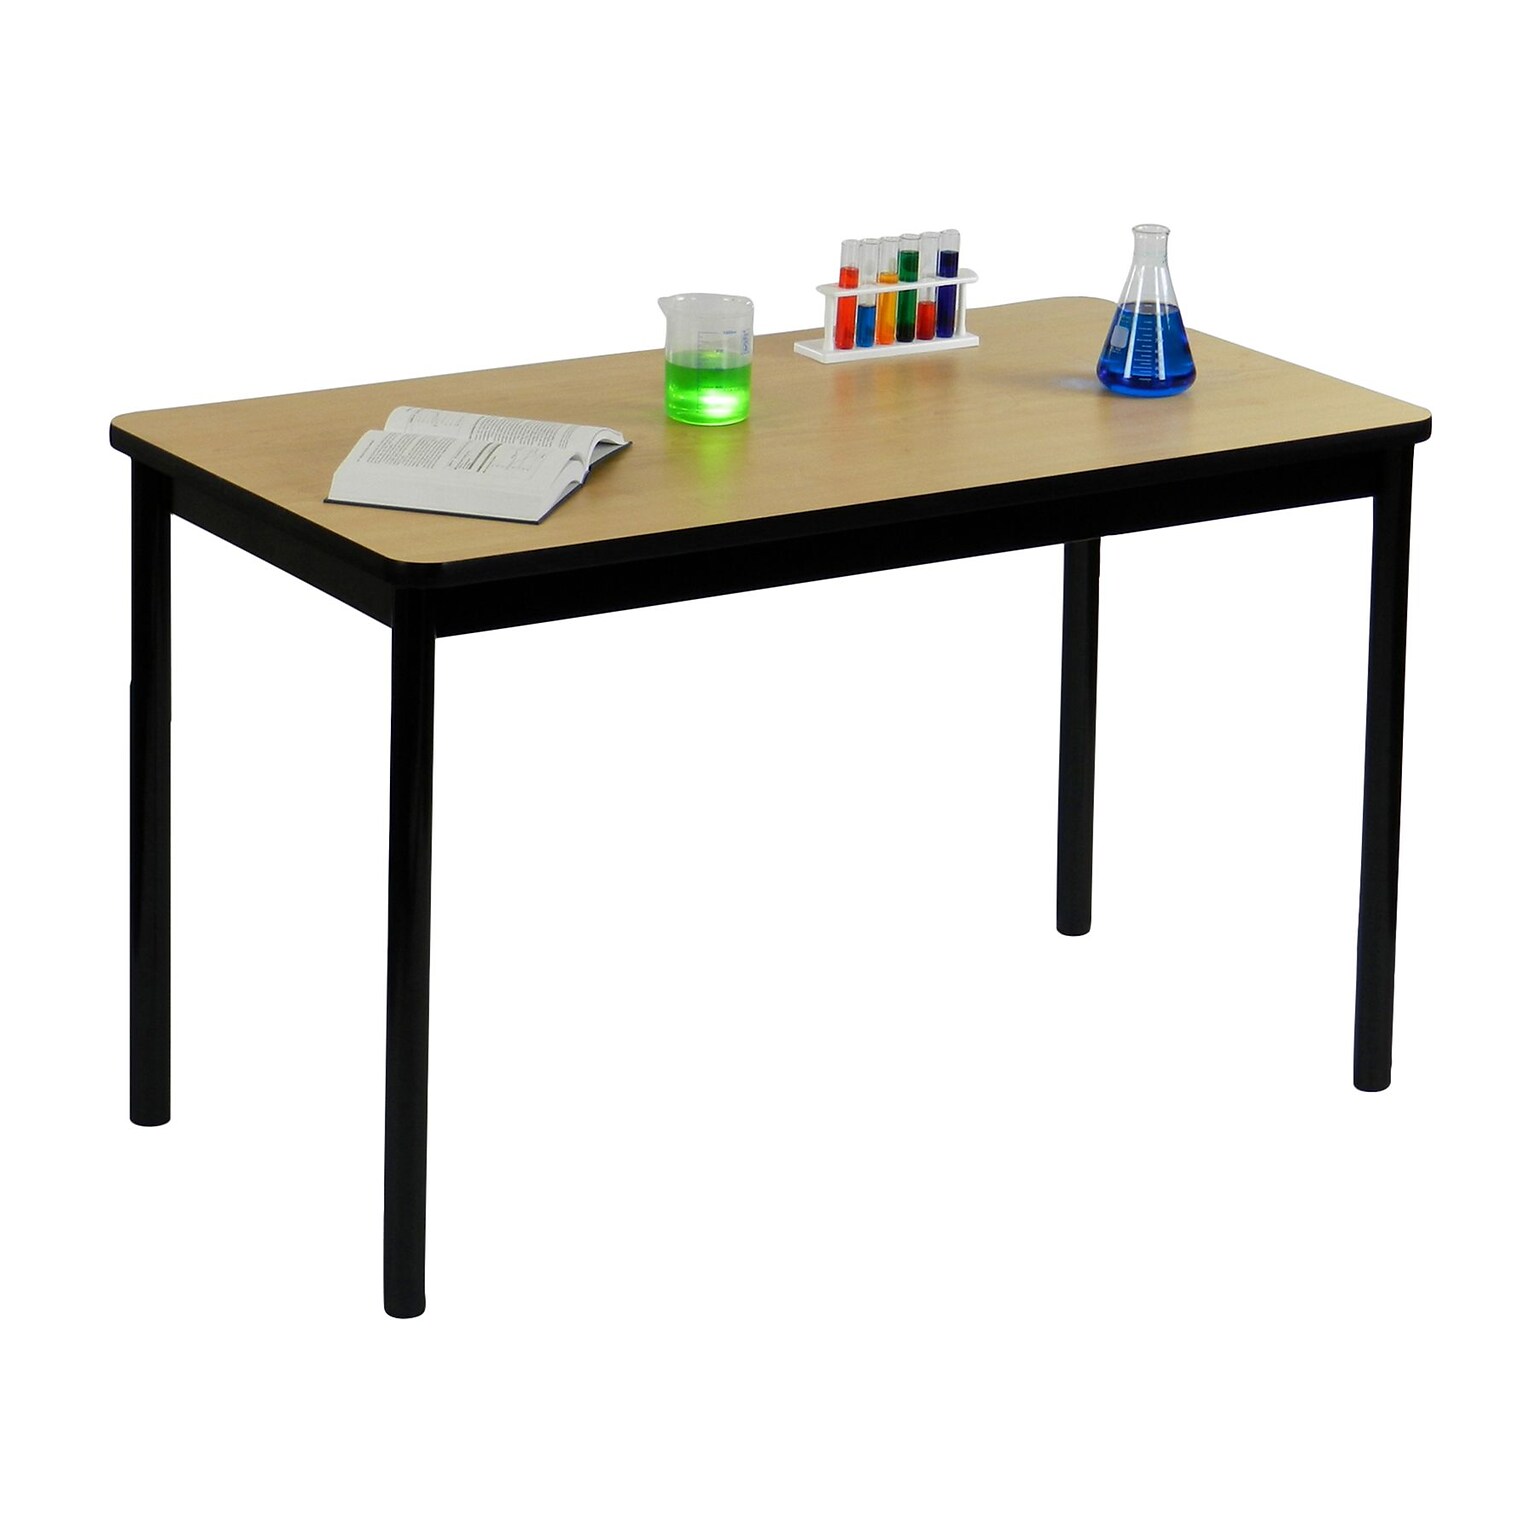 Correll, Inc. 60 Rectangular Shape High-Pressure Laminate Top Lab Table, Fusion Maple with Black Frame (LT2460)